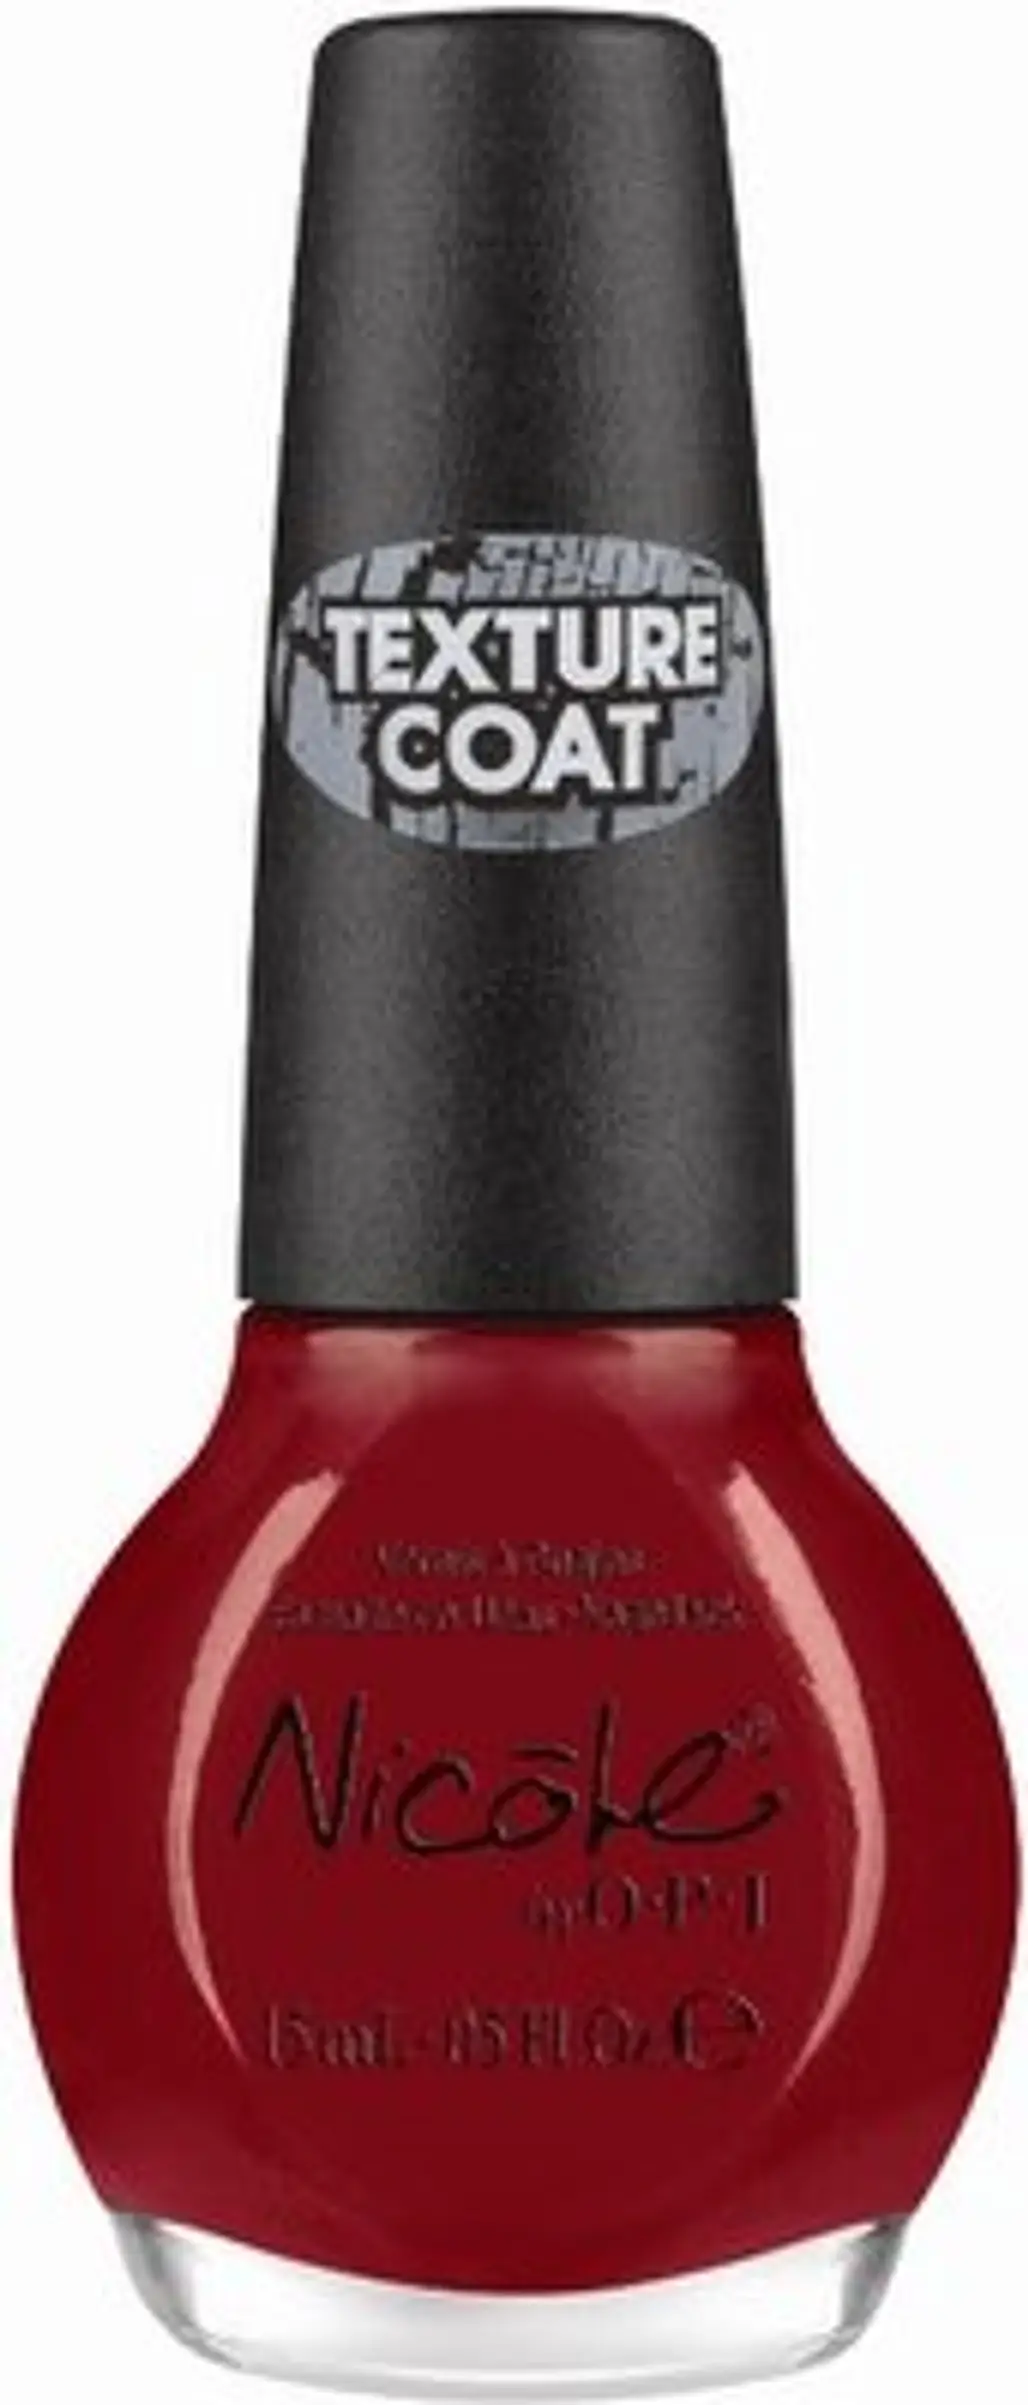 OPI Texture Coat Nail Lacquer in Red